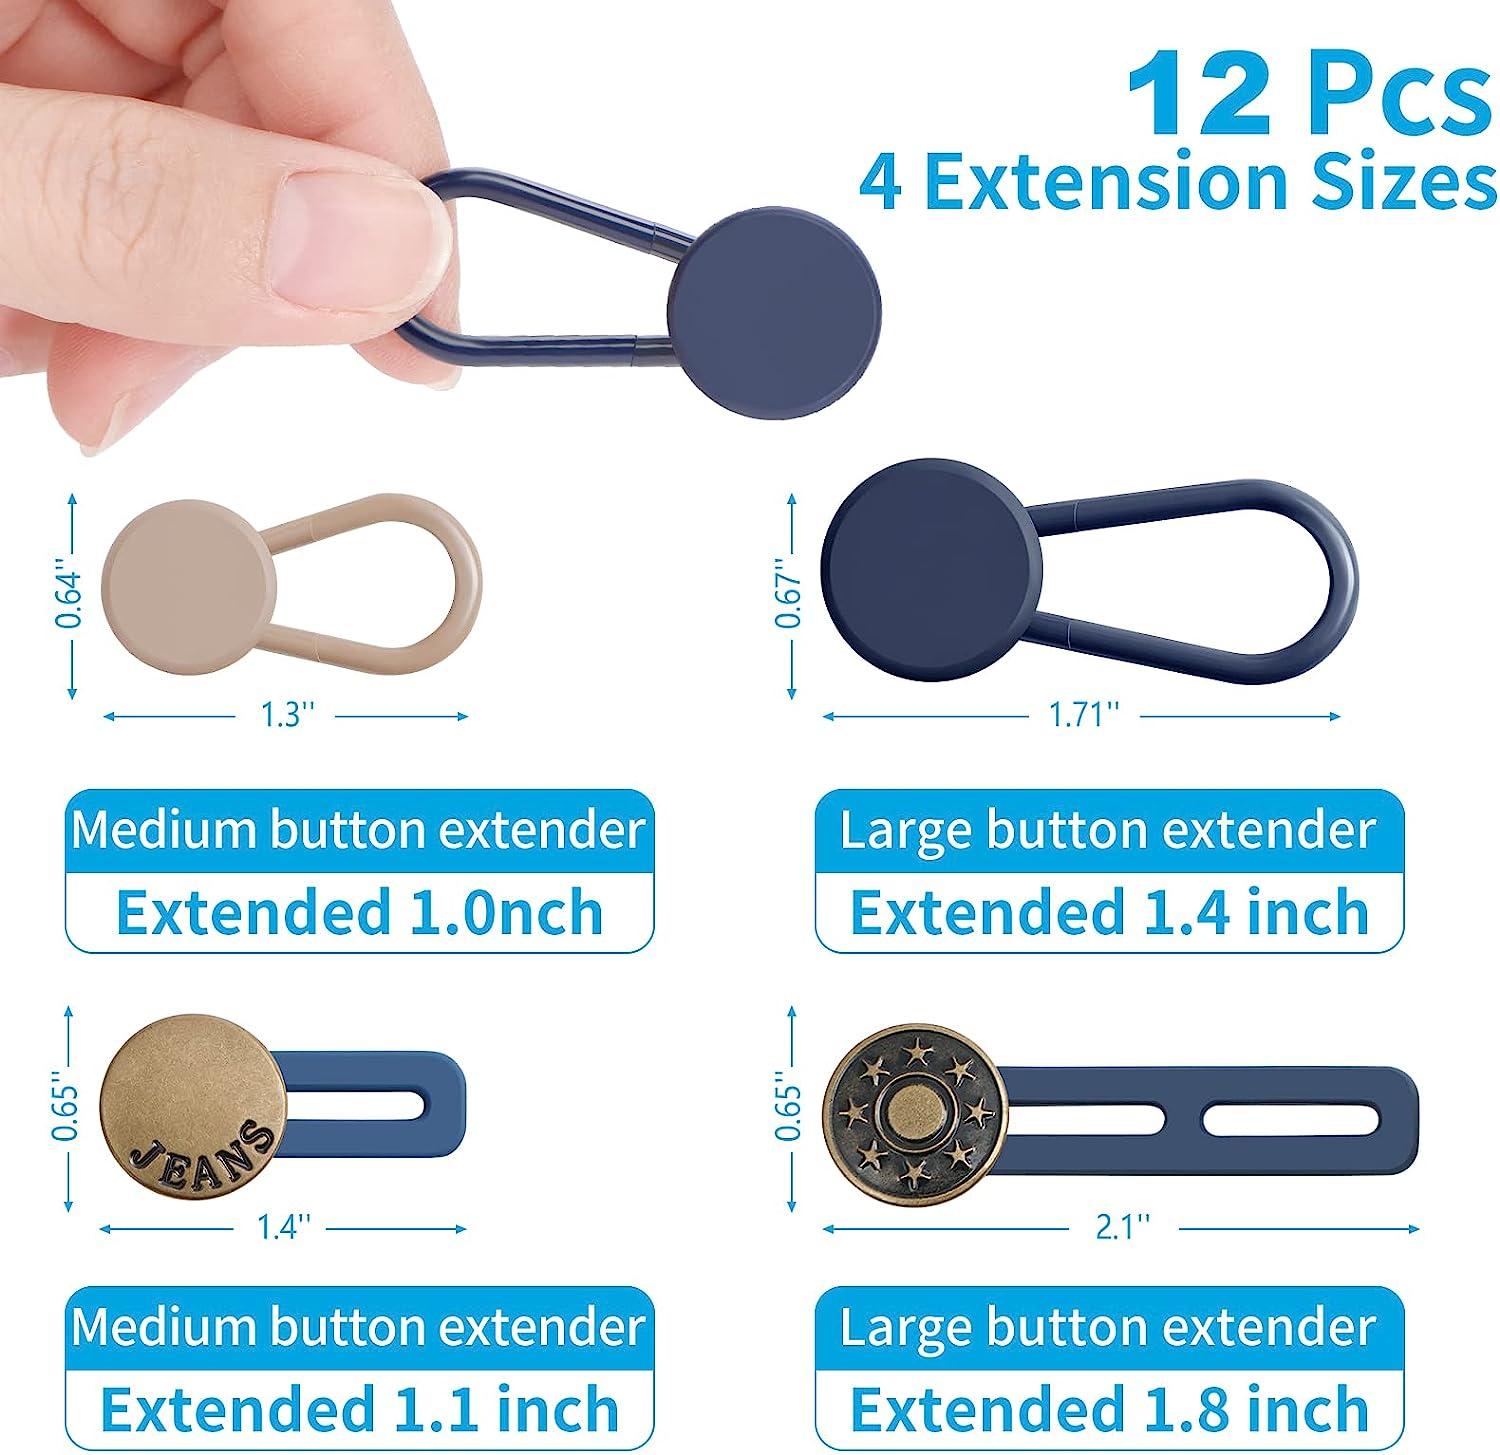  Button Extender For Pants Waist Extenders For Pants